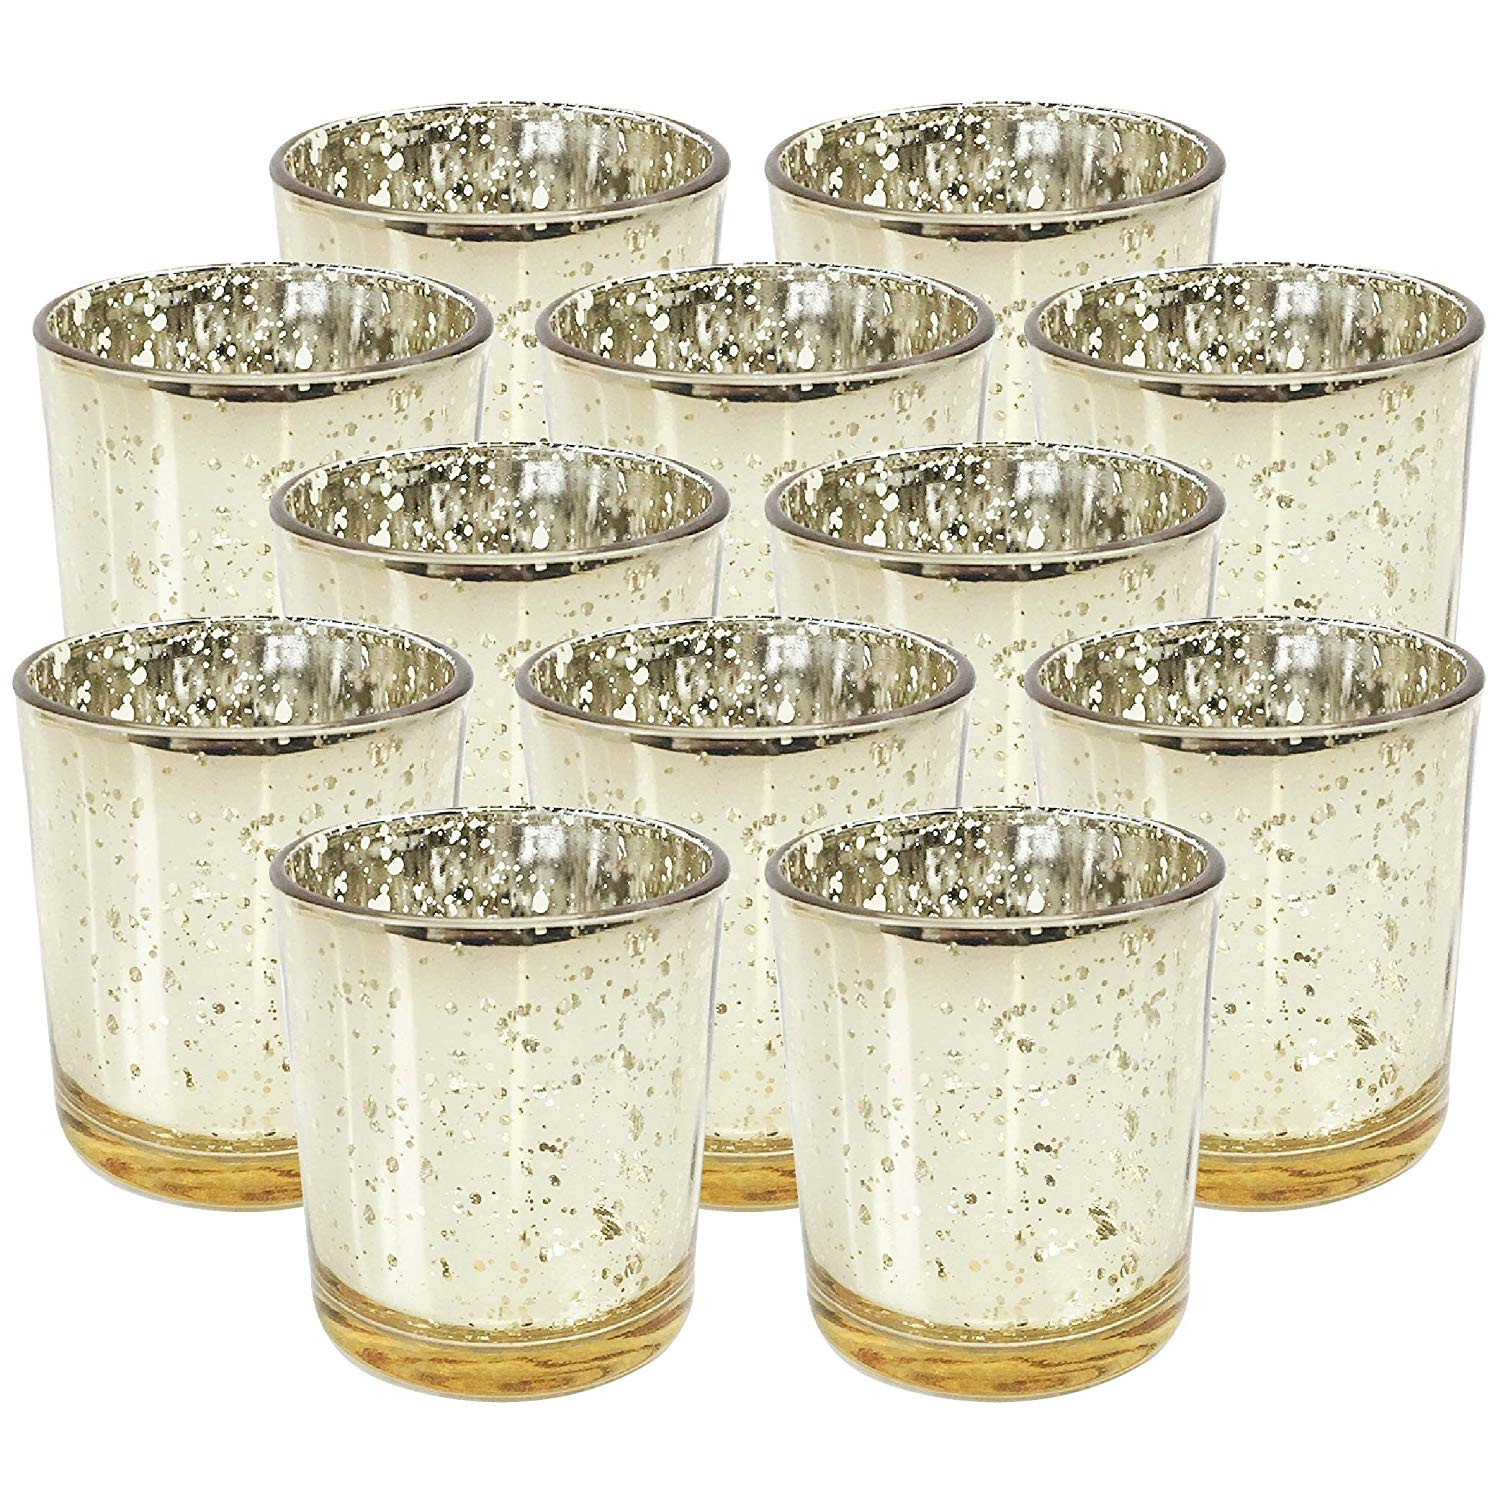 5 inch square glass vases bulk of amazon com just artifacts mercury glass votive candle holders 4in pertaining to amazon com just artifacts mercury glass votive candle holders 4in speckled gold set of 12 mercury glass votive candle holders for weddings and home